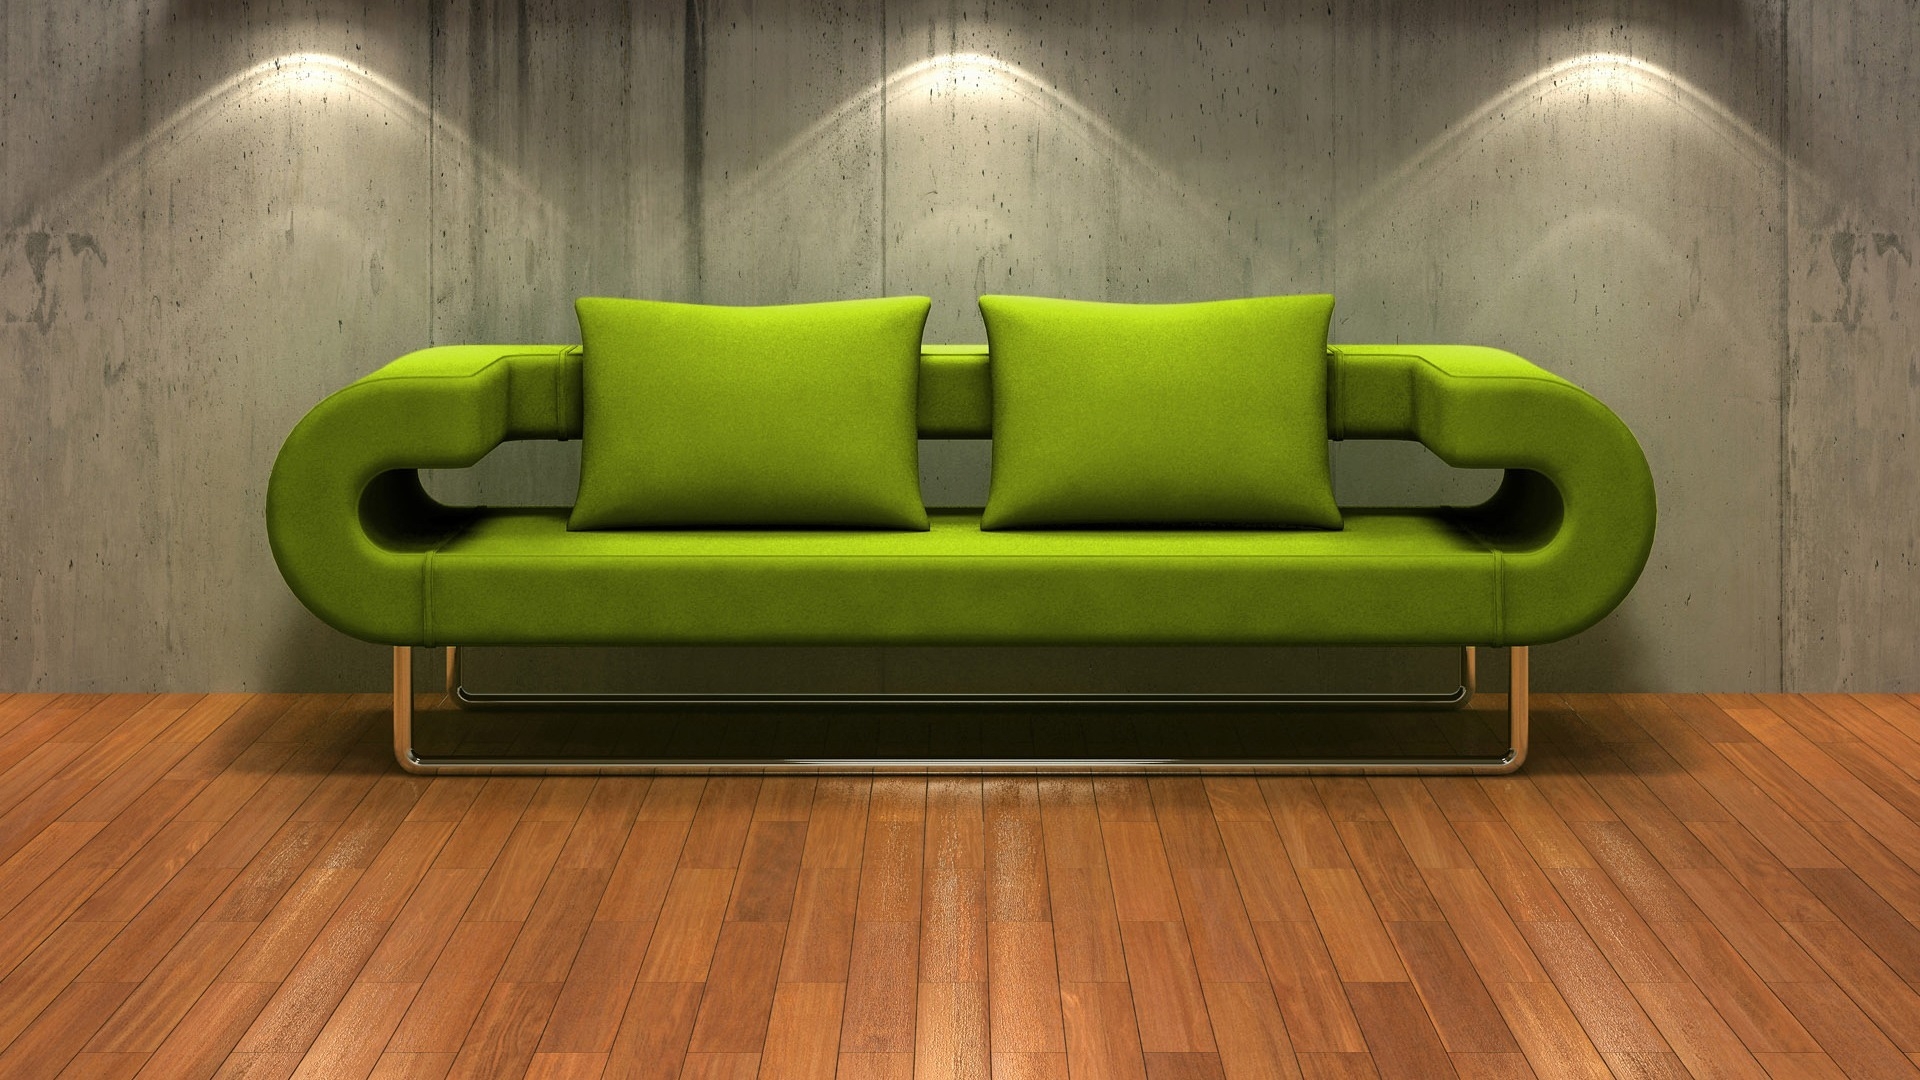 3D Couch for 1920 x 1080 HDTV 1080p resolution